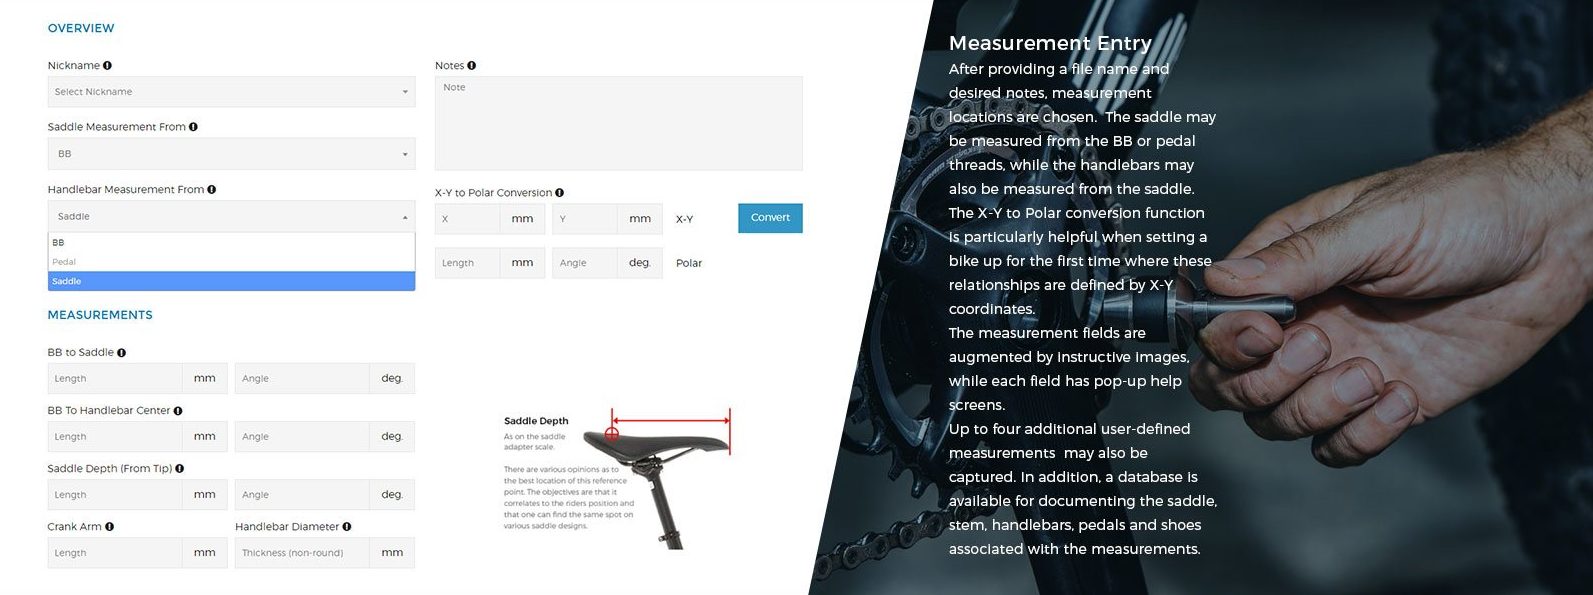 VeloAngle dials in better bike fit transfers with new measurement tool and technique